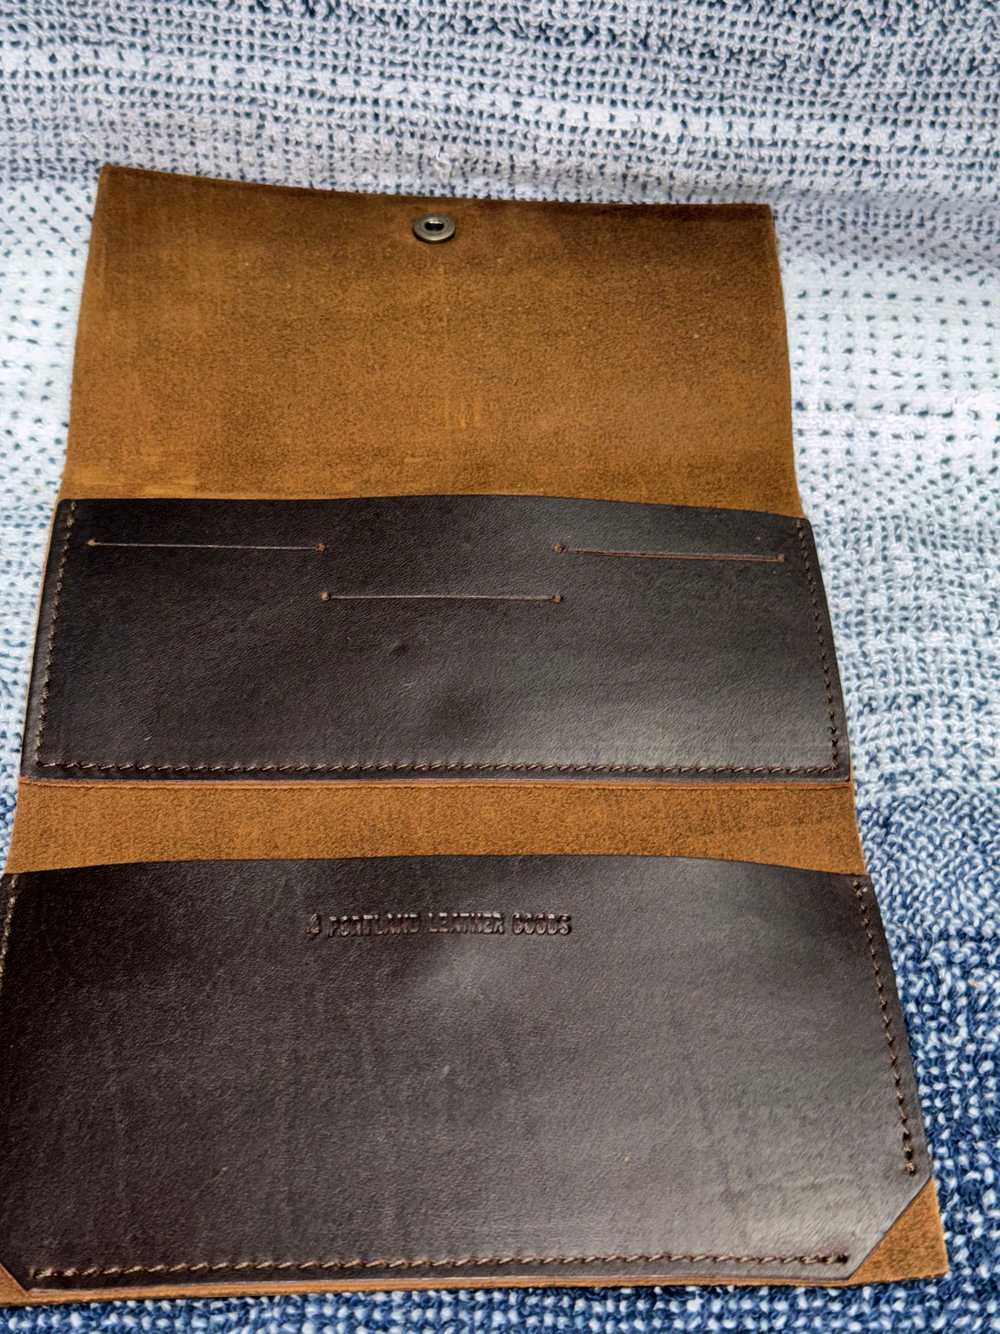 Portland Leather Leather Rancher Wallet - image 2